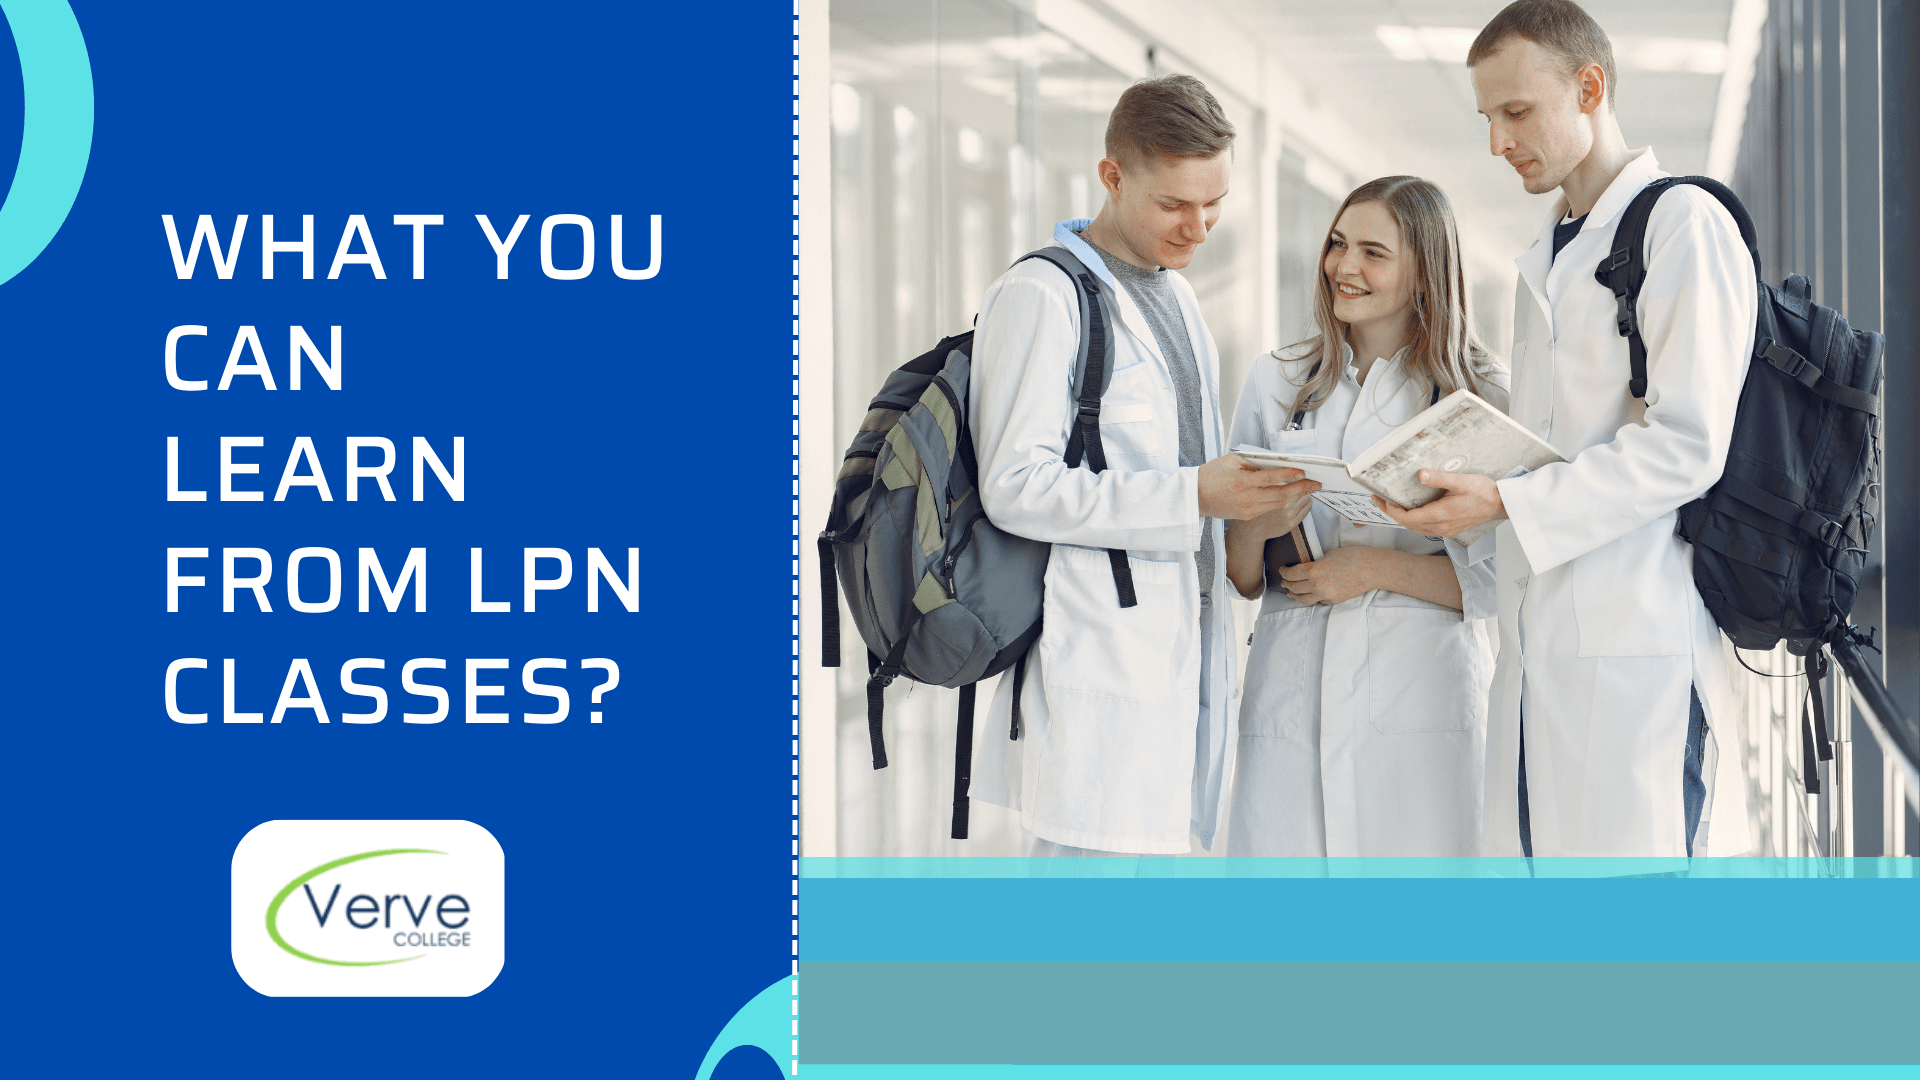 What You Can Learn From LPN Classes?